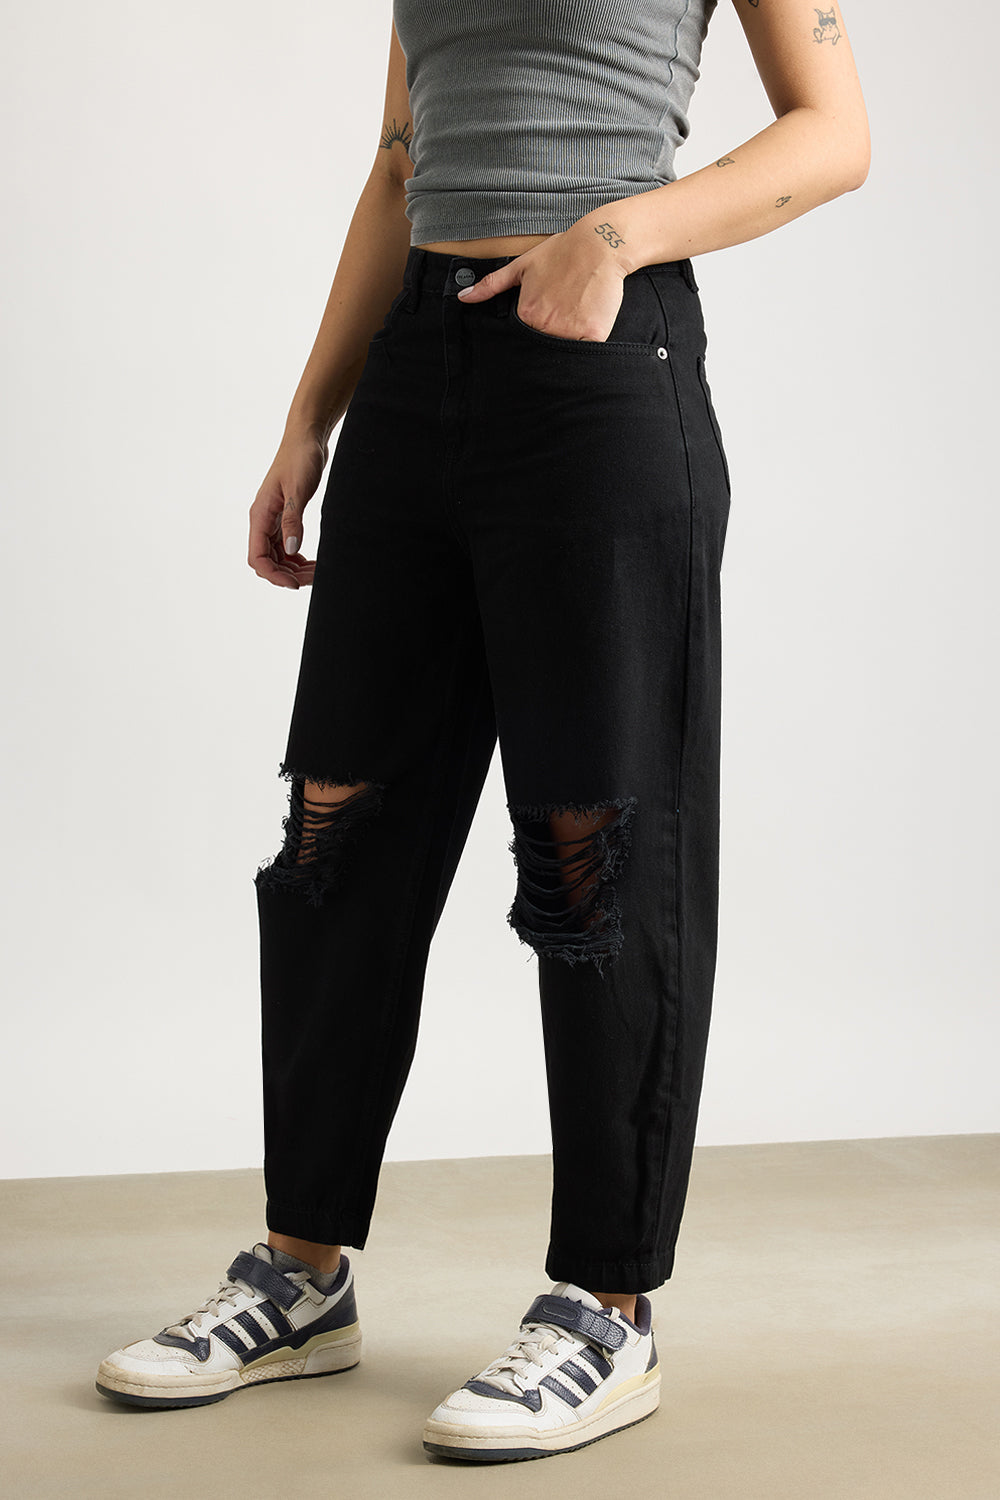 RELAXED DISTRESS BLACK JEANS